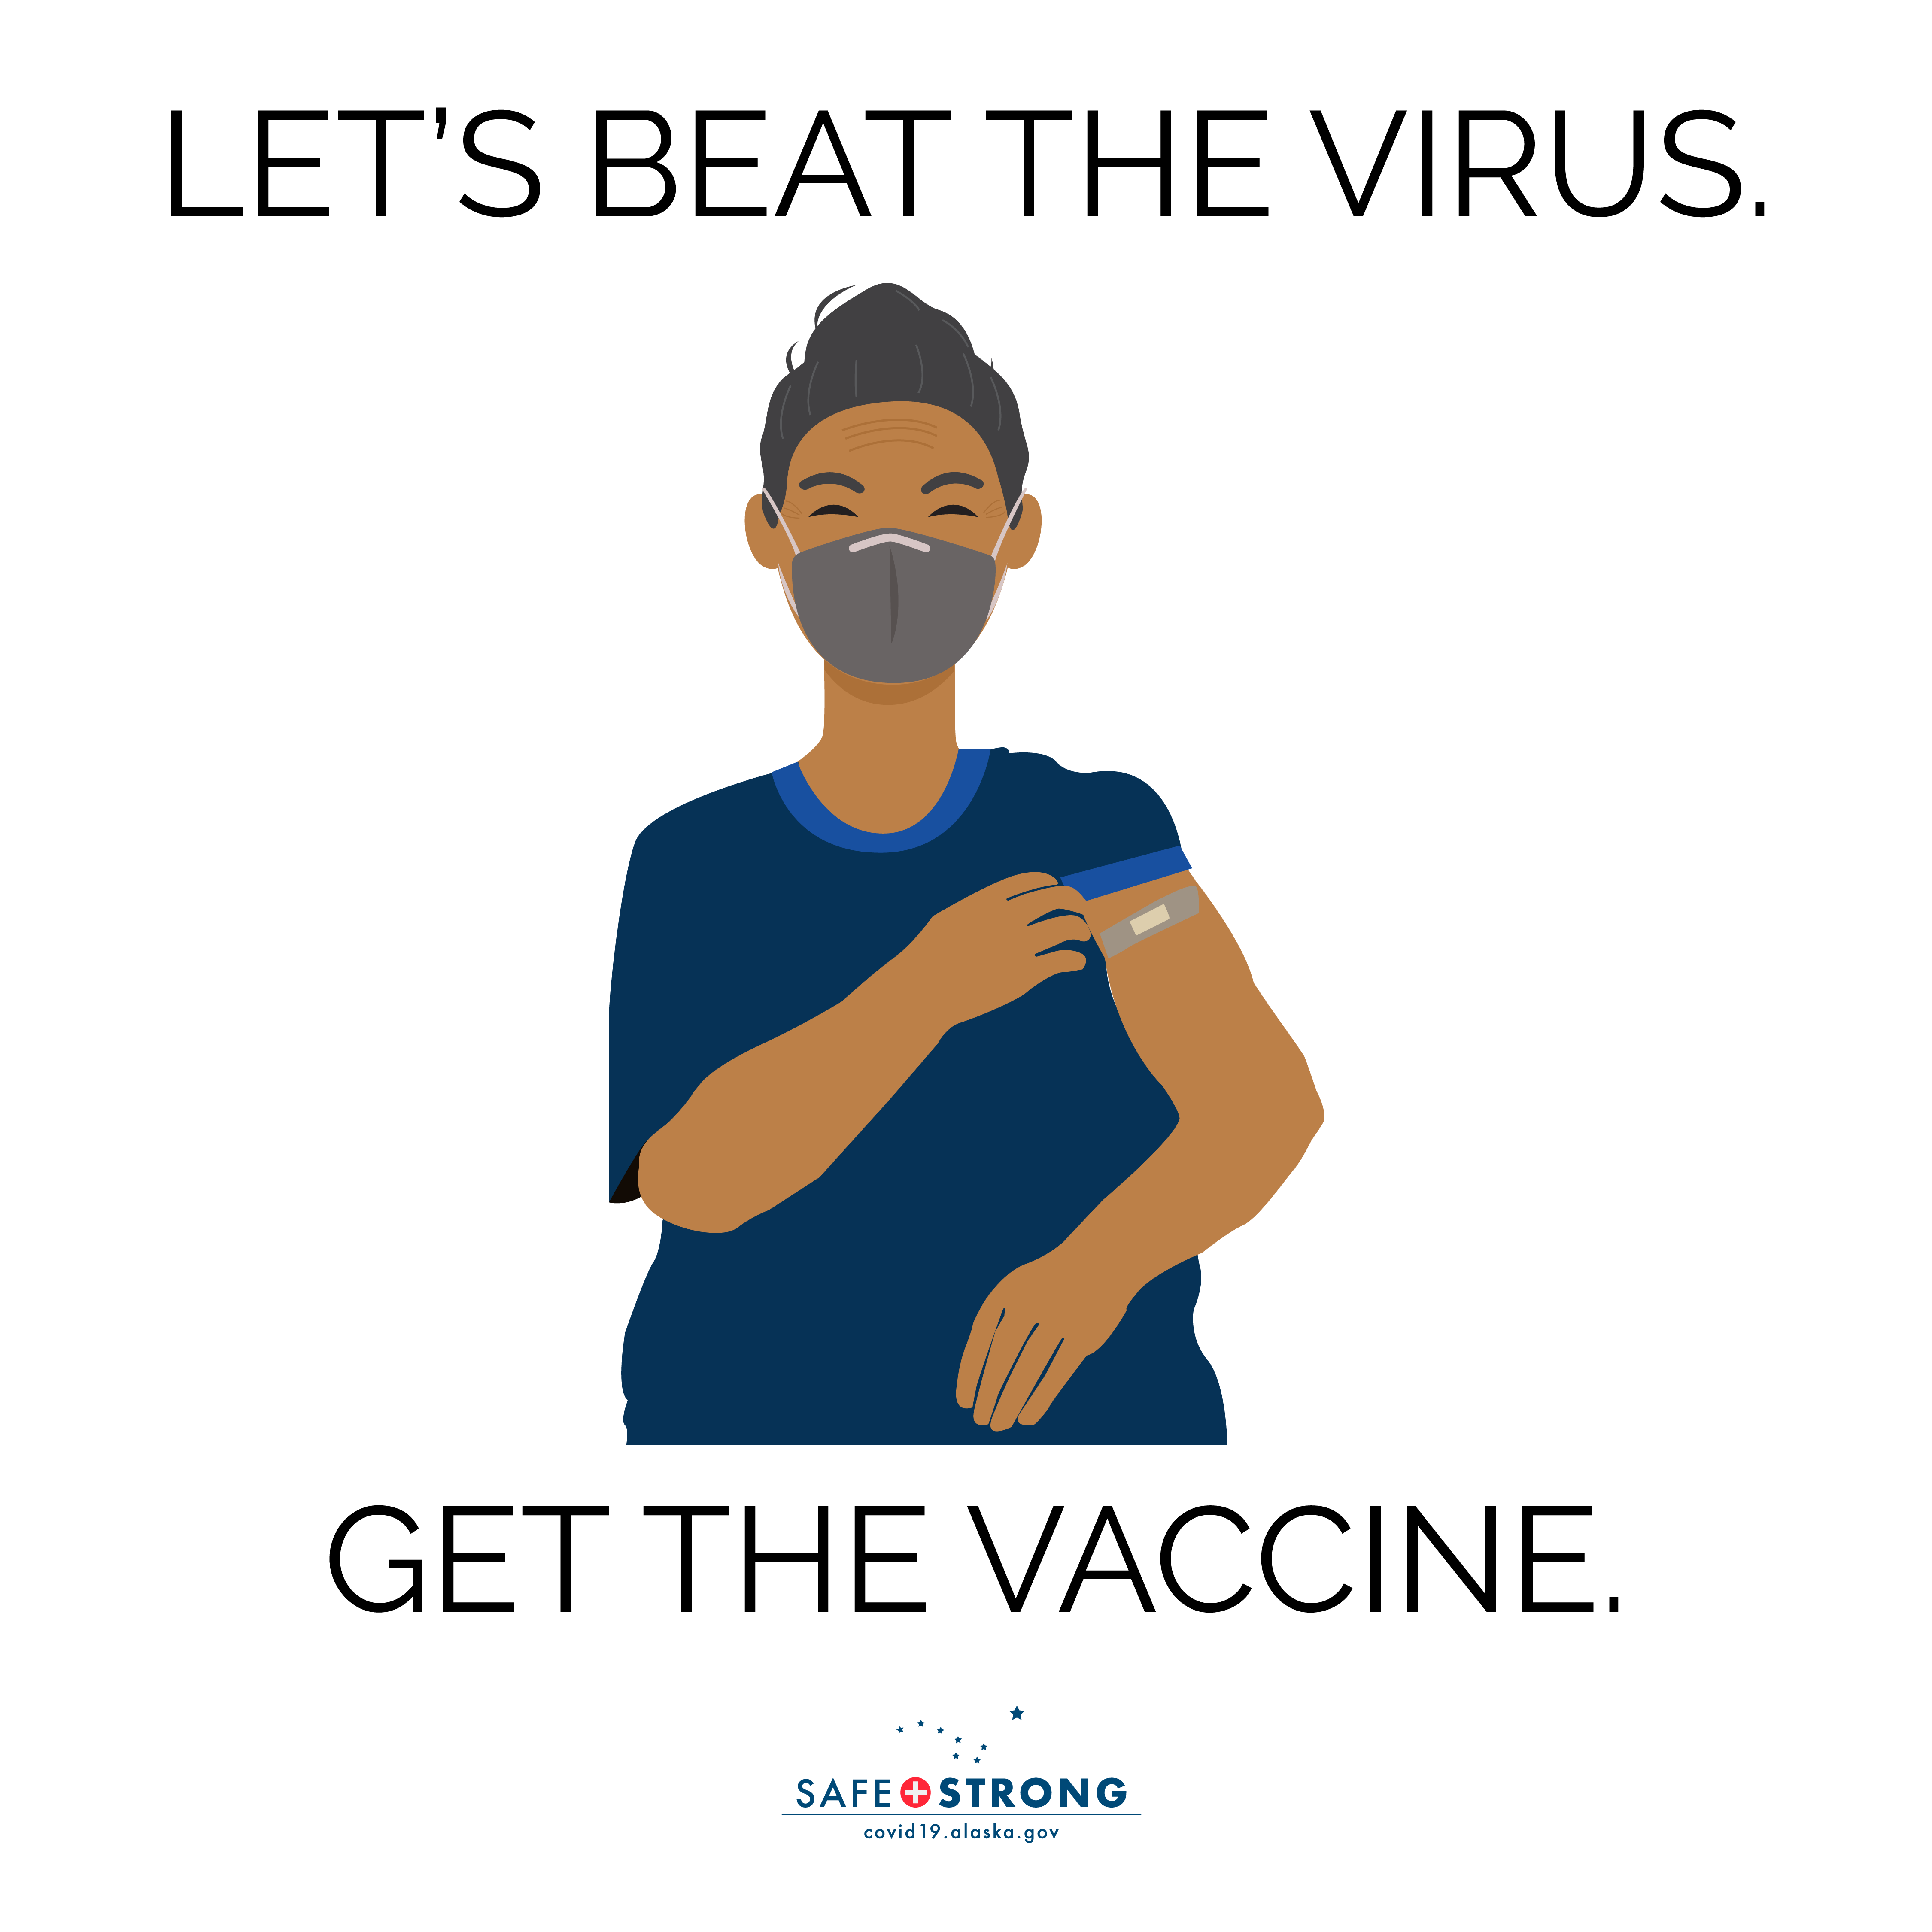 Let's beat the virus. Get the vaccine.